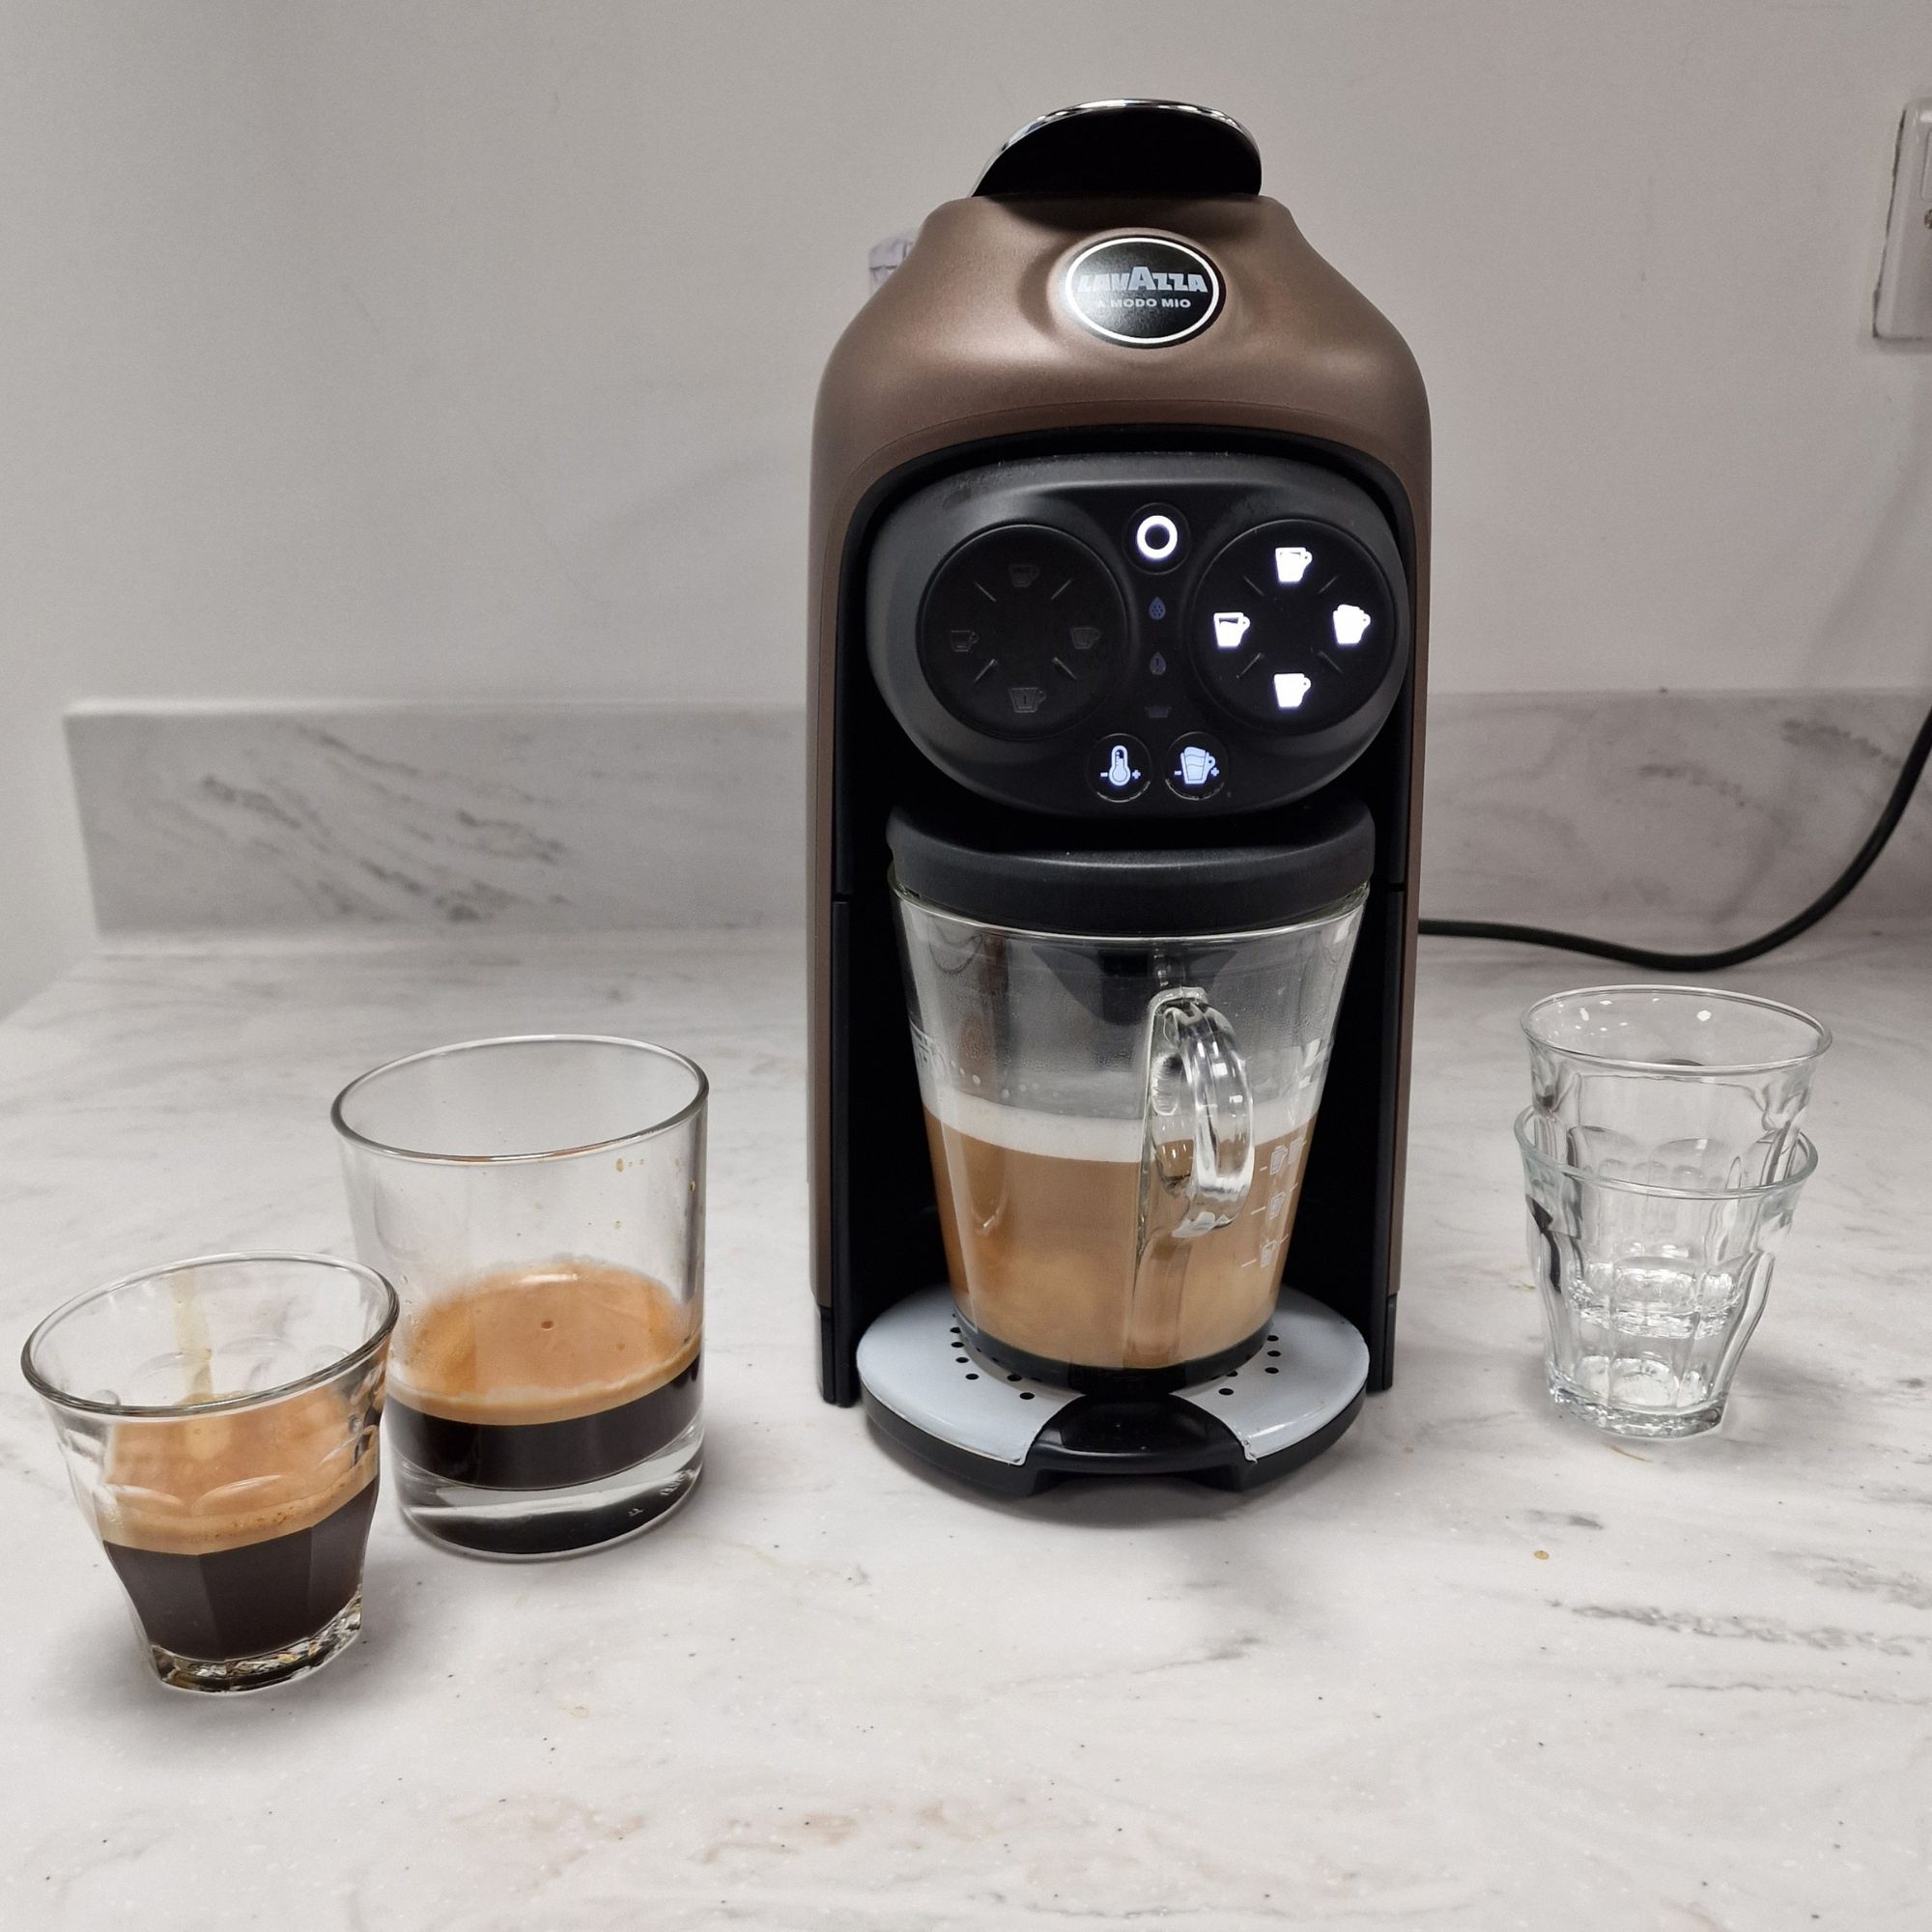 The Lavazza Desea is an ideal Christmas gift for latte-lovers